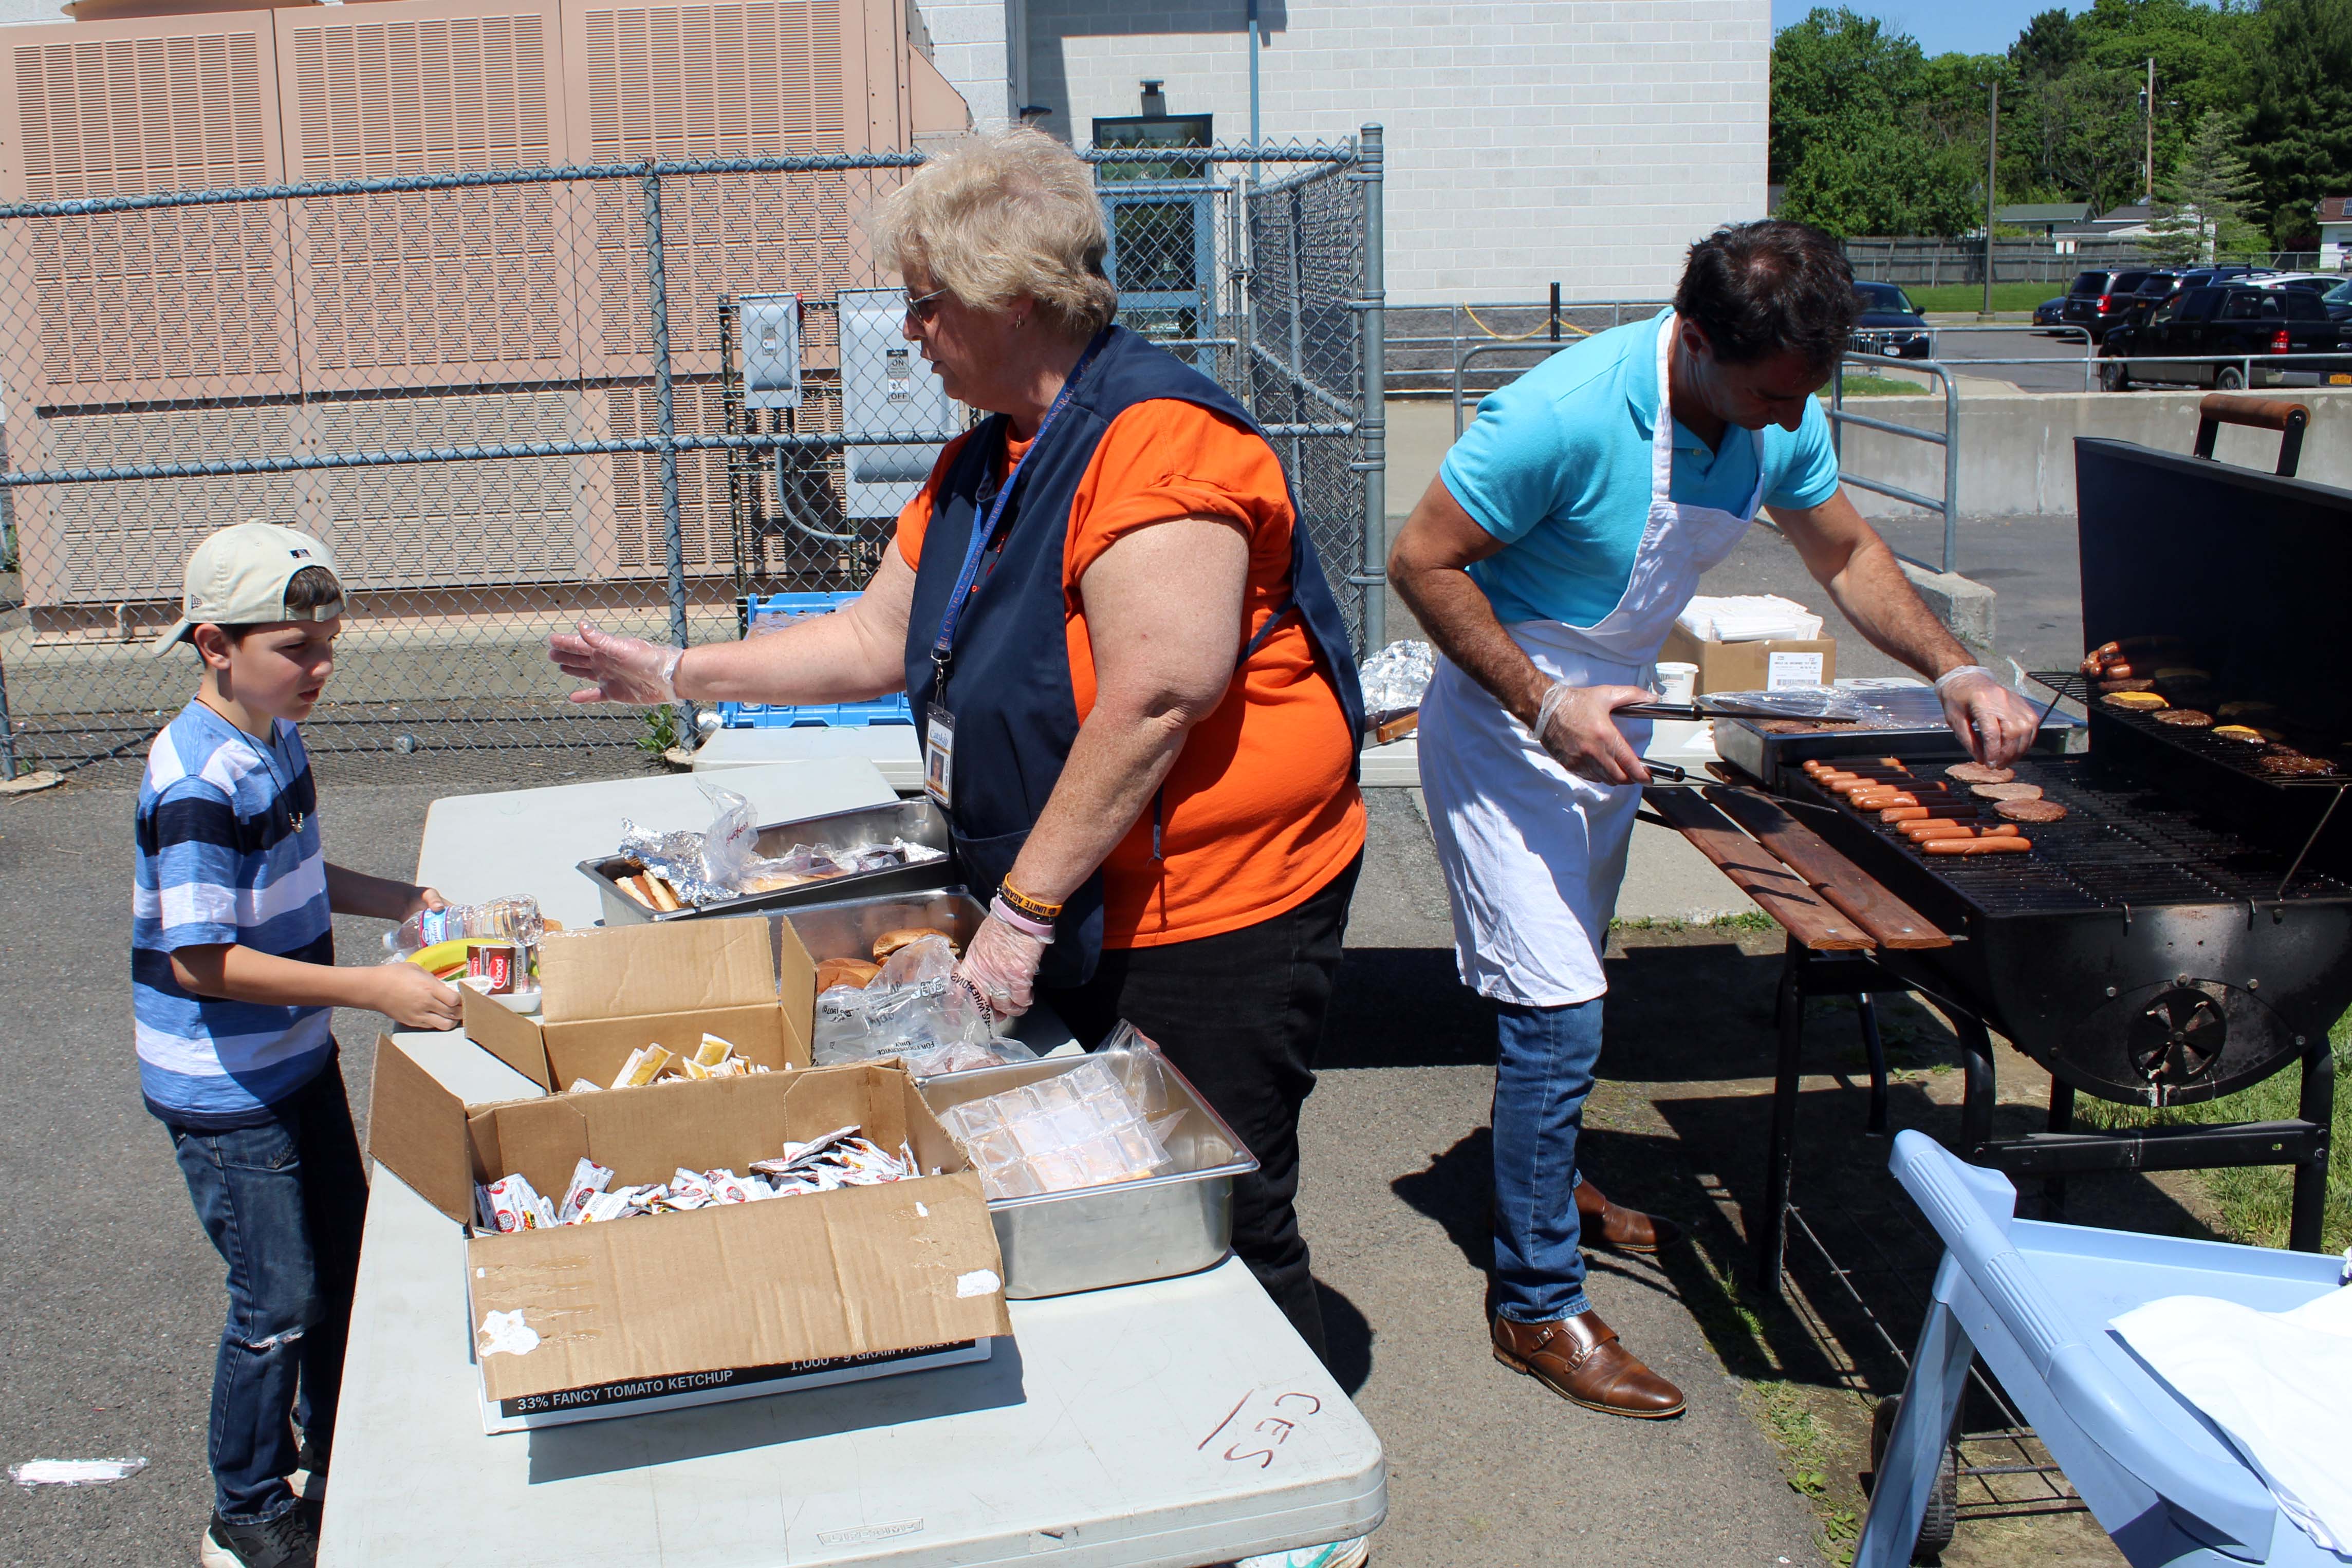 food service workers grilling up lunch